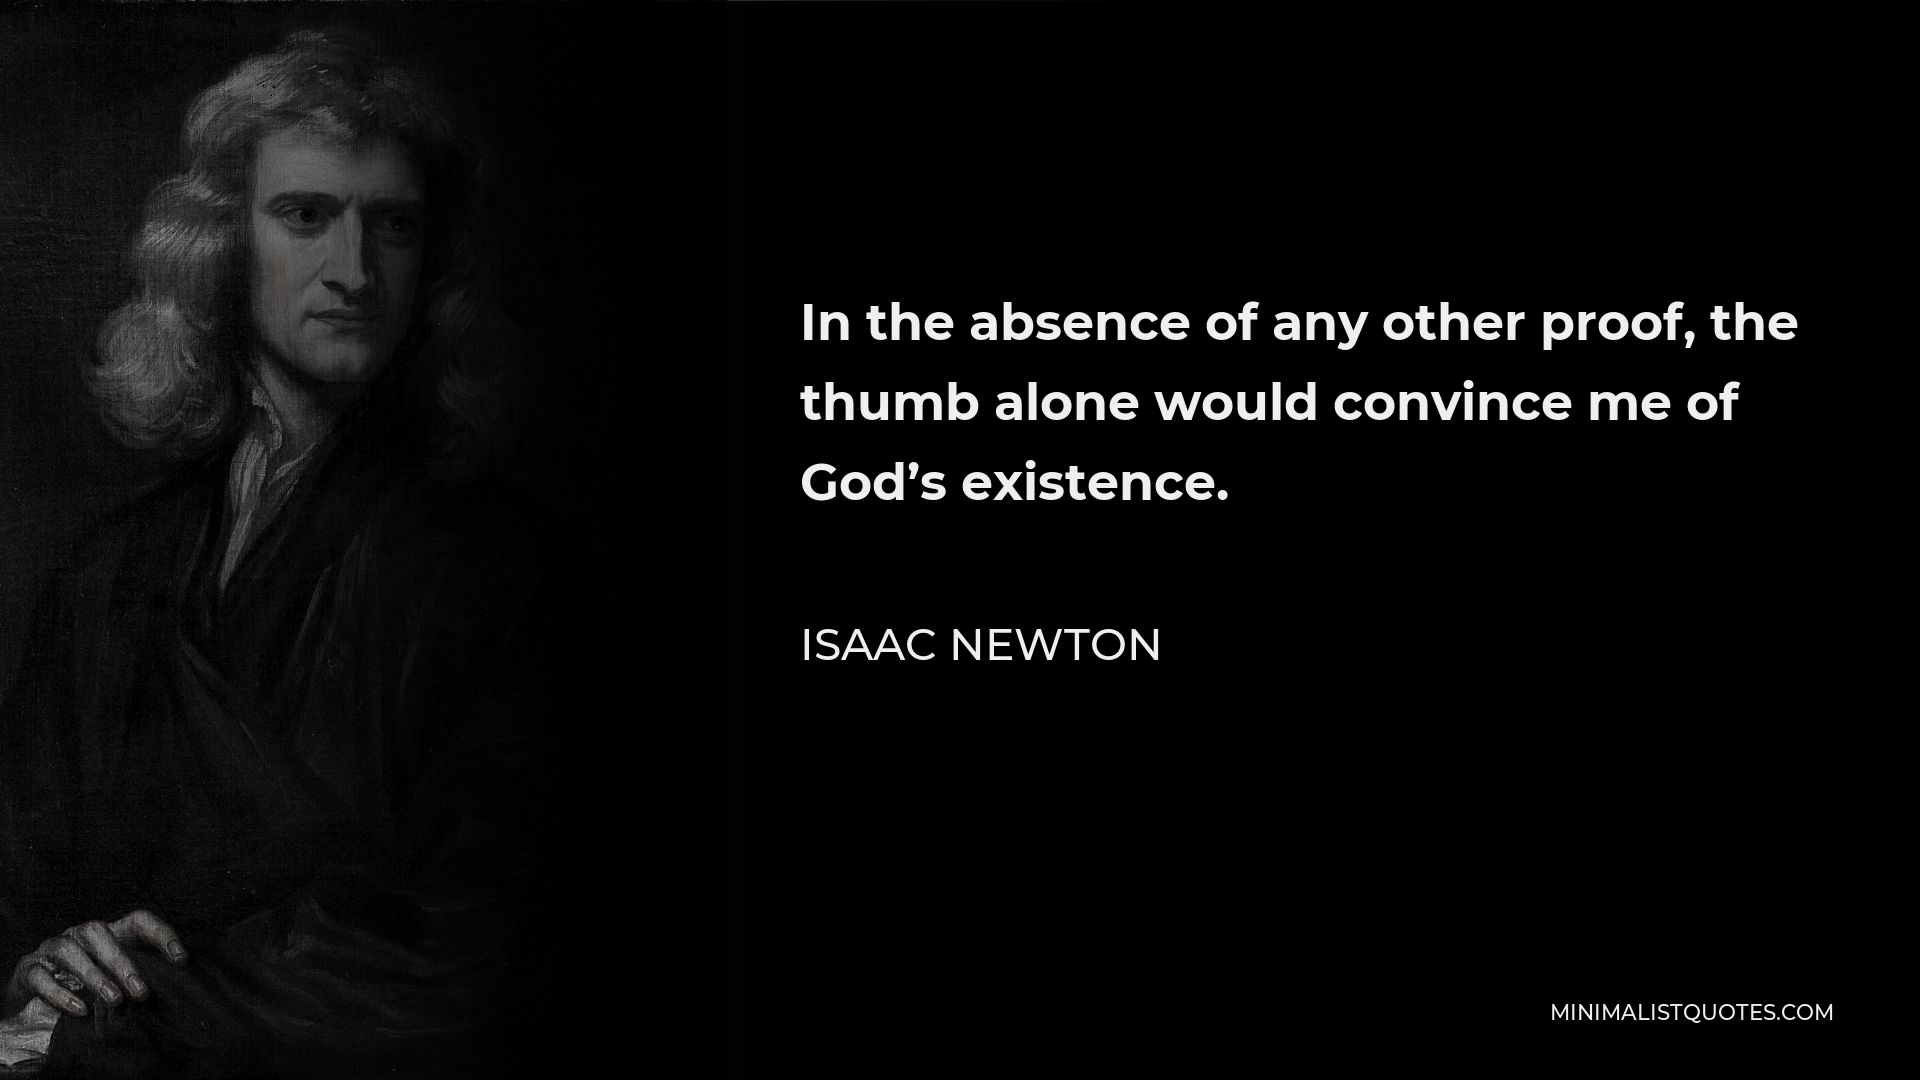 Isaac Newton Quote - In the absence of any other proof, the thumb alone would convince me of God’s existence.